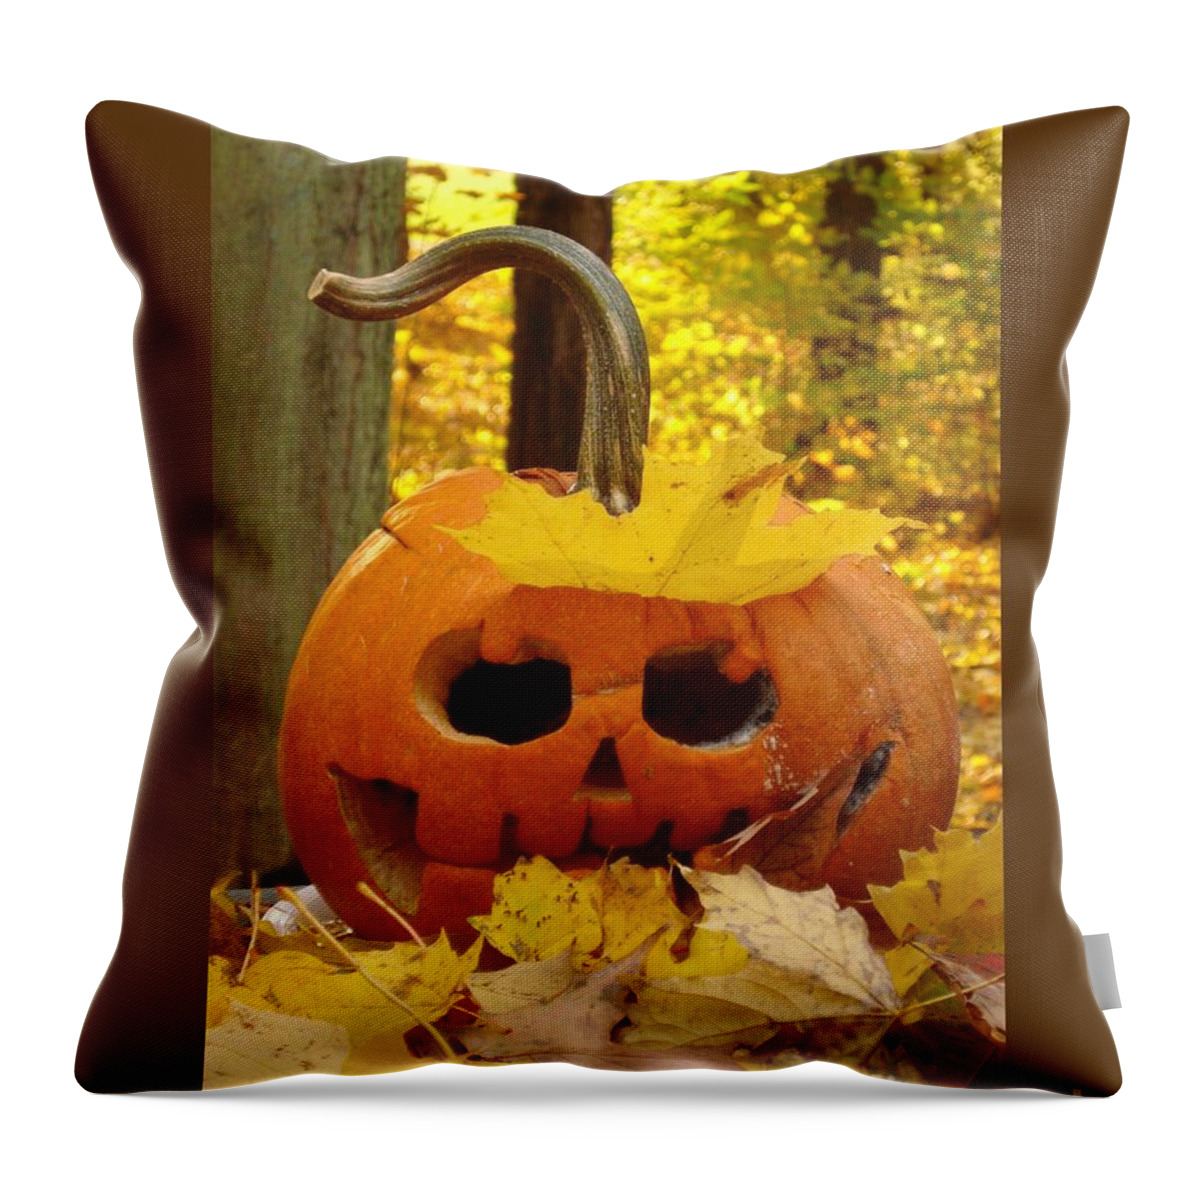 Pumpkin Throw Pillow featuring the photograph Old Jack by Patricia Overmoyer